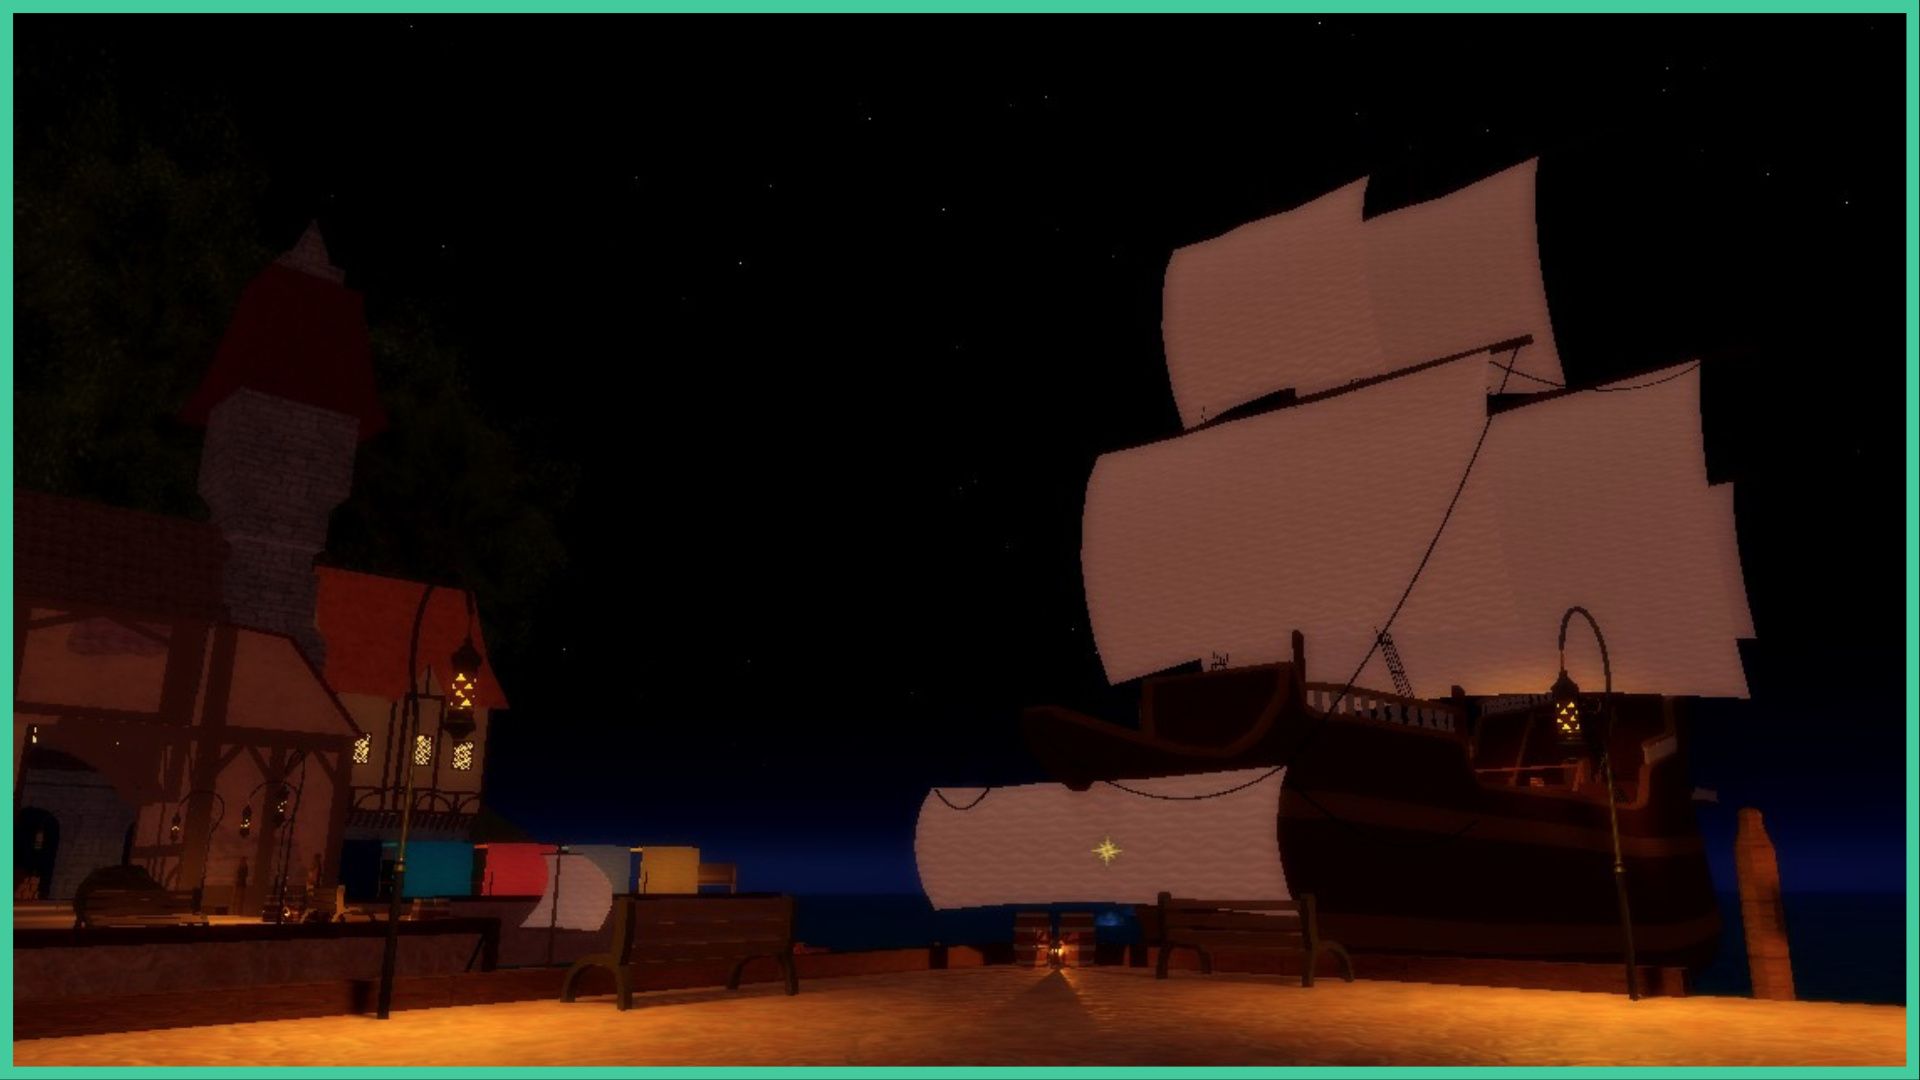 feature image for our legends rewritten tier list, the image features a screenshot from the spawn area of the pirate ship with the sails up as its docked in and the wooden dock, there are glowing streetlamps, benches that overlook the sea, and old style buildings in front of a tree as the stars glow in the sky